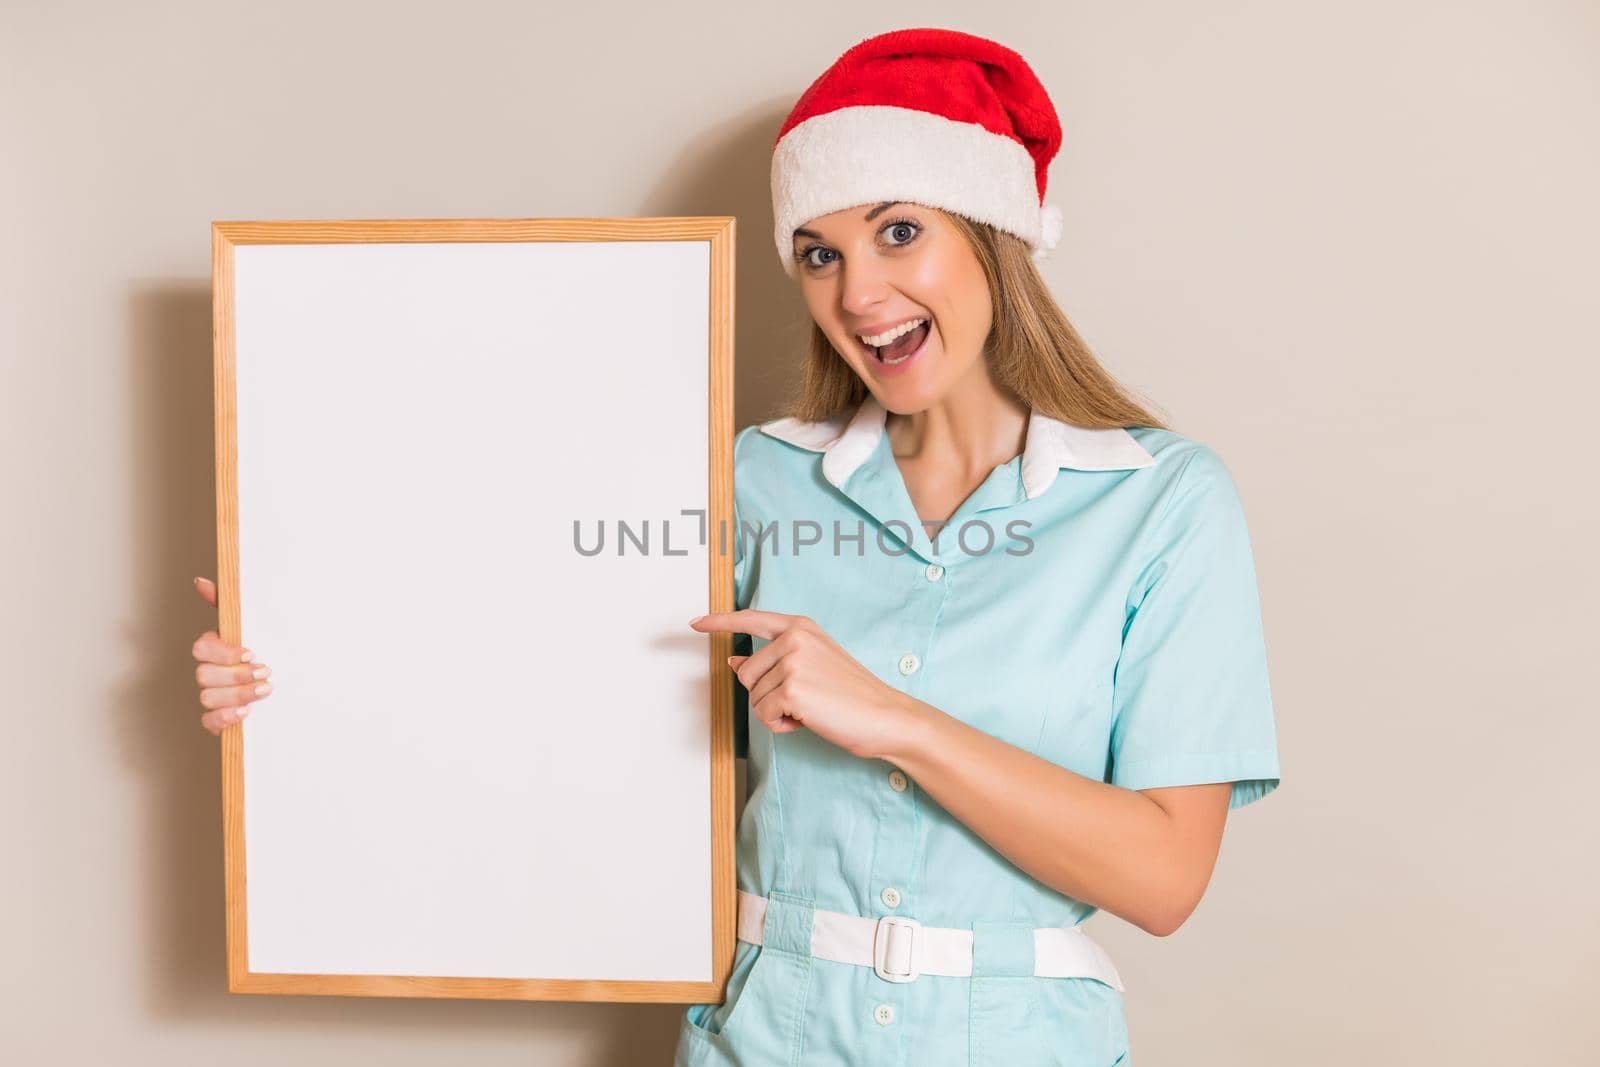 Portrait of nurse with Santa hat pointing at white board.